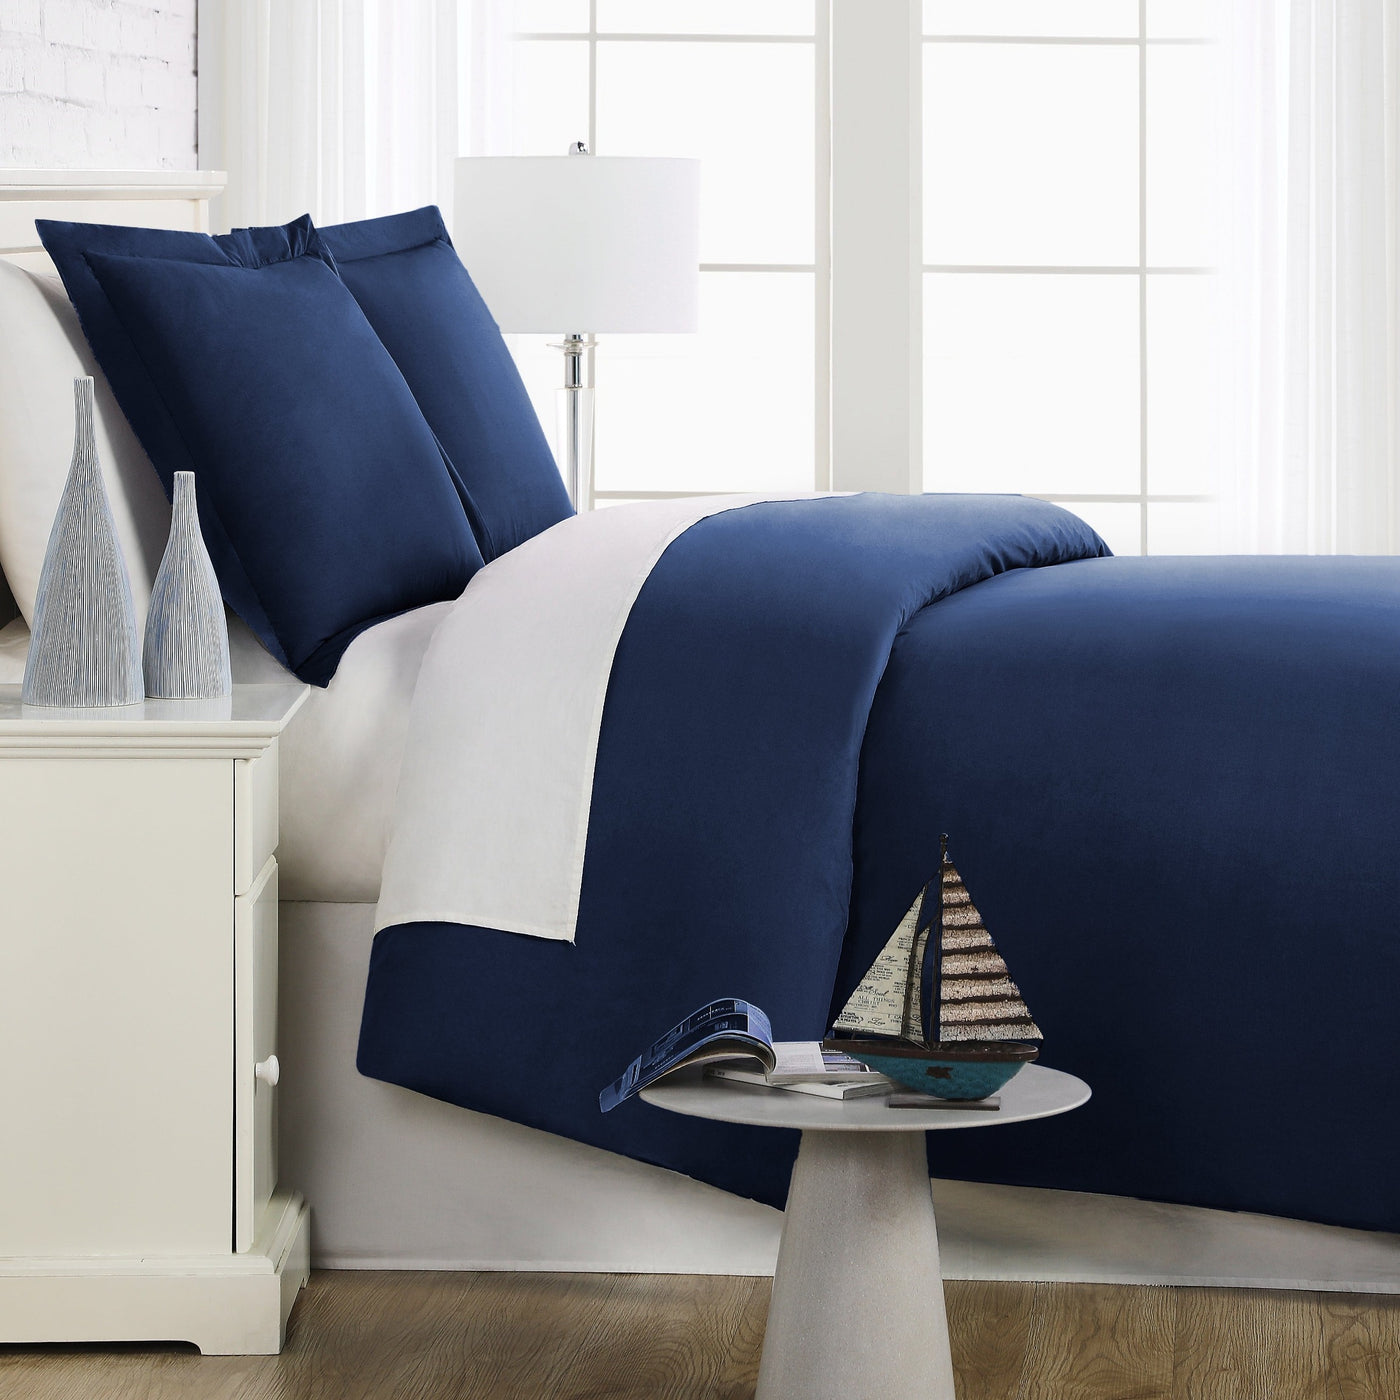 Side View of Everyday Essentials Duvet Cover Set in Navy Blue#color_navy-blue